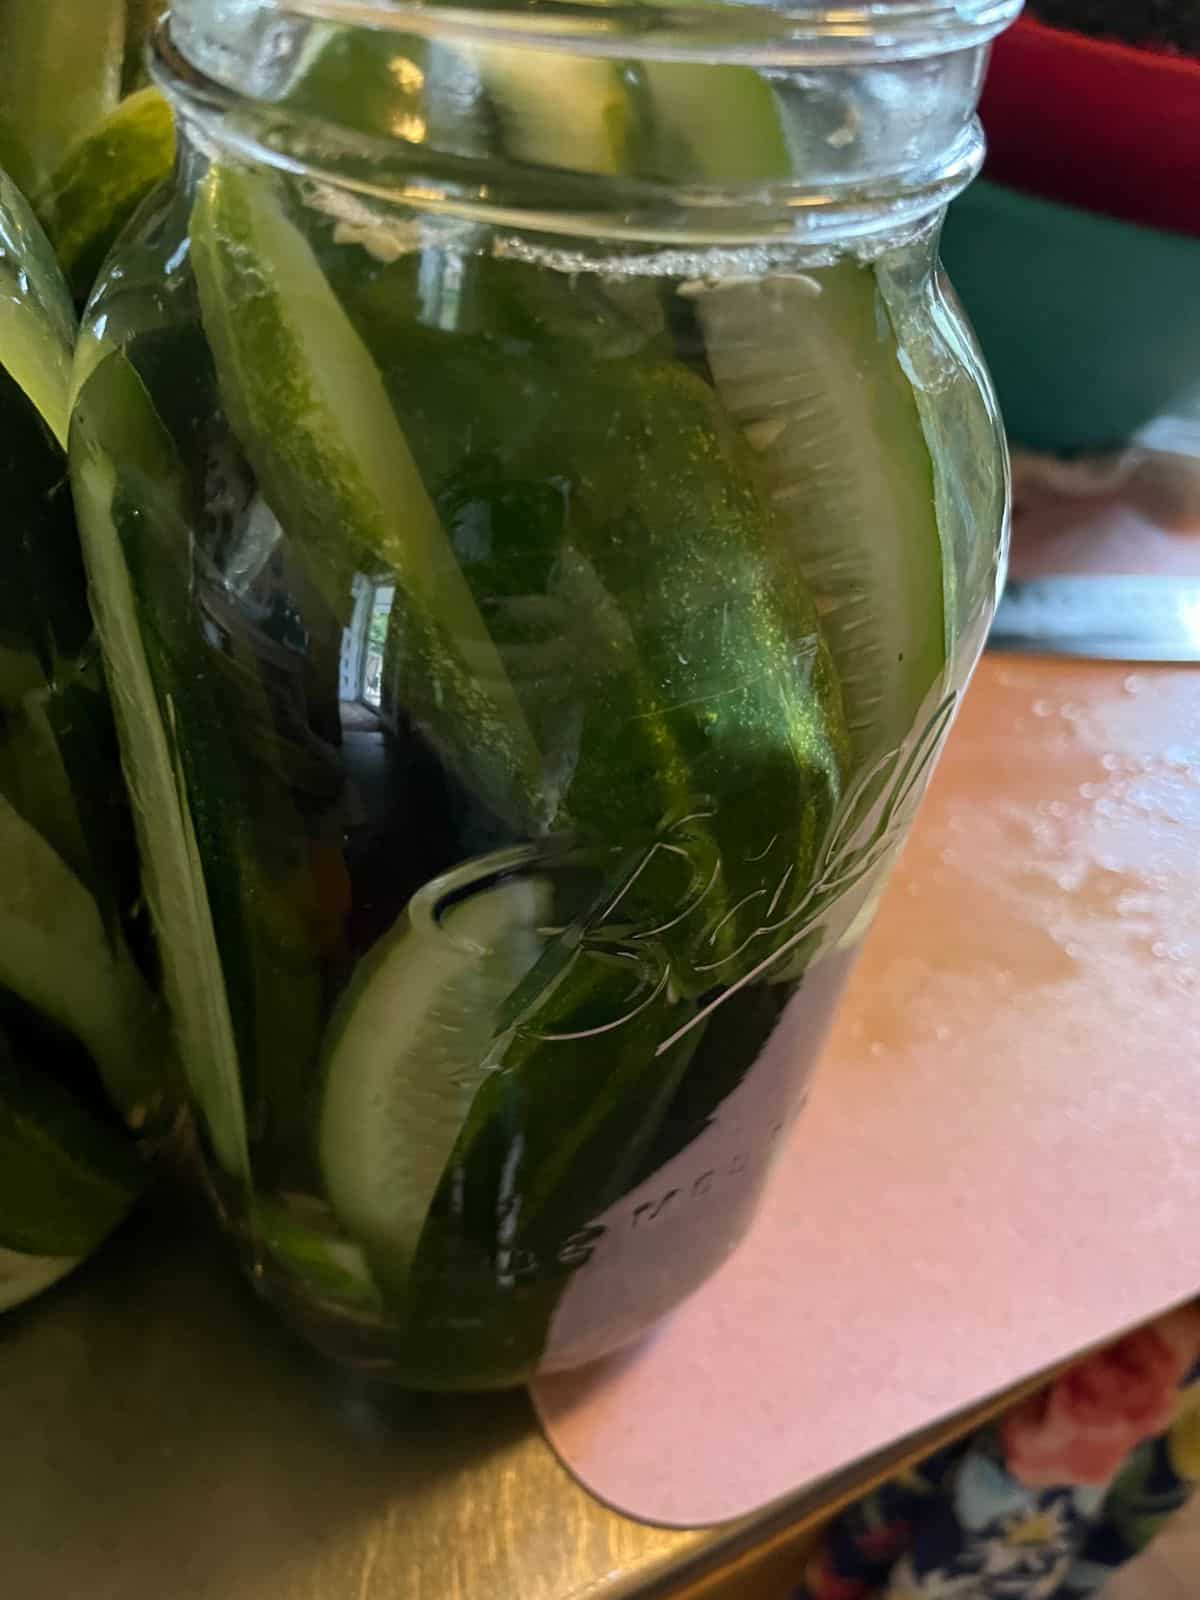 A jar of fresh made pickles